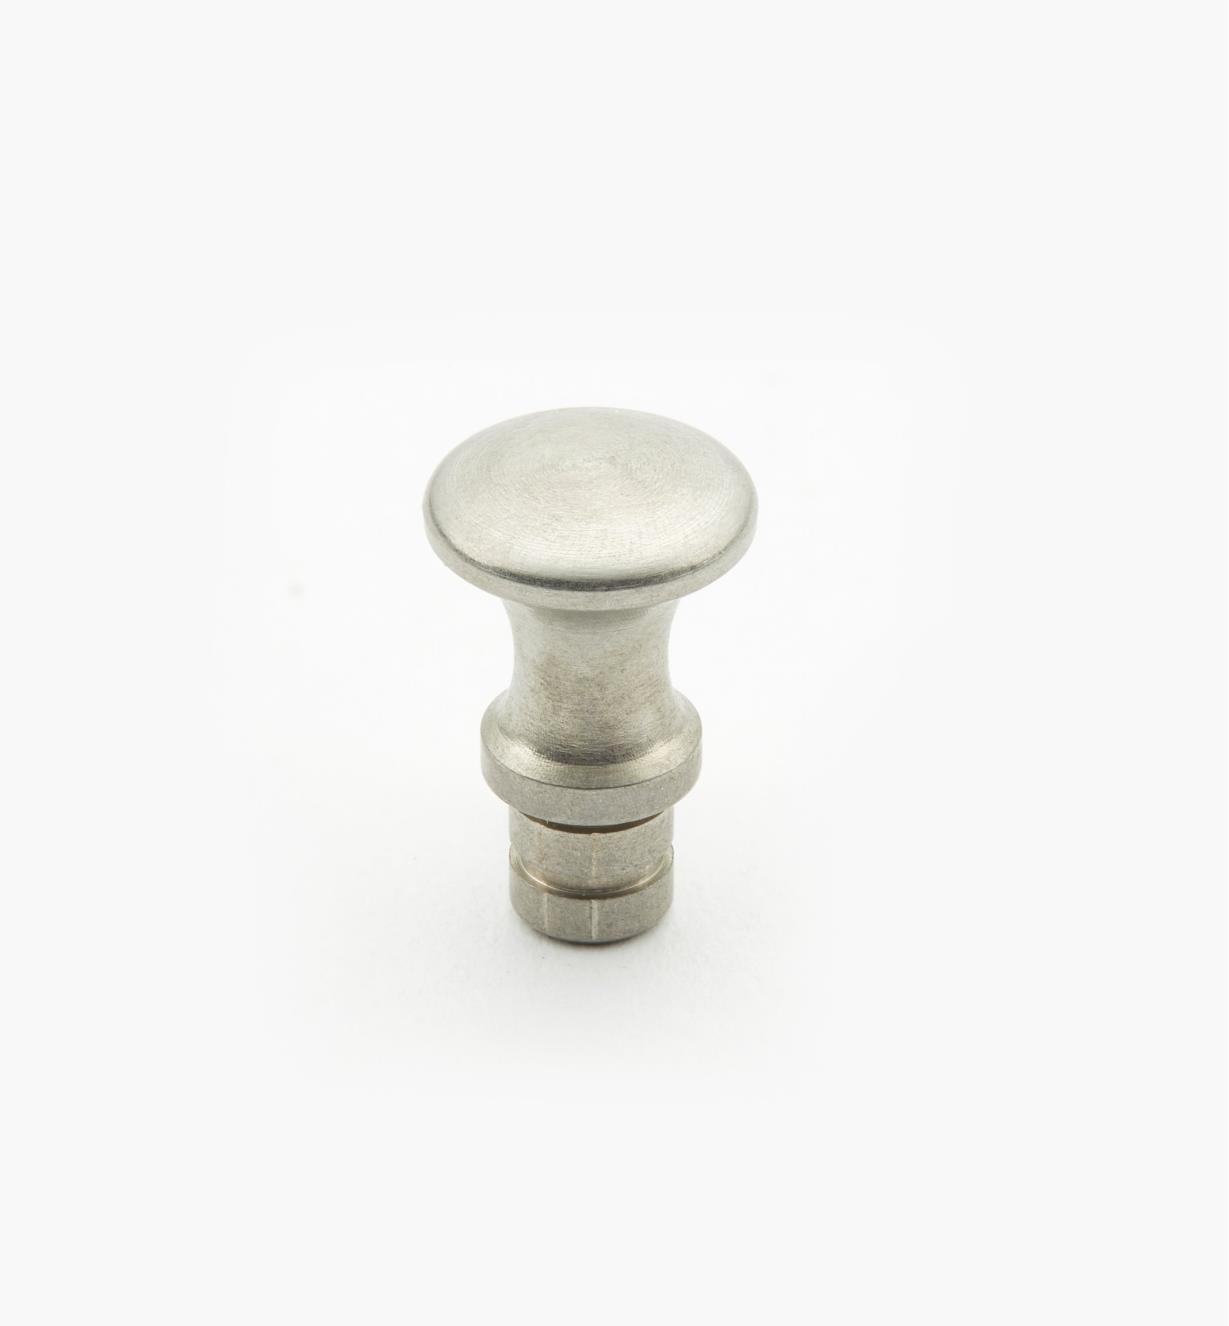 05H2222 - 3/8" x 3/8" Lee Valley Small Turned Stainless Steel Knob (9/16")